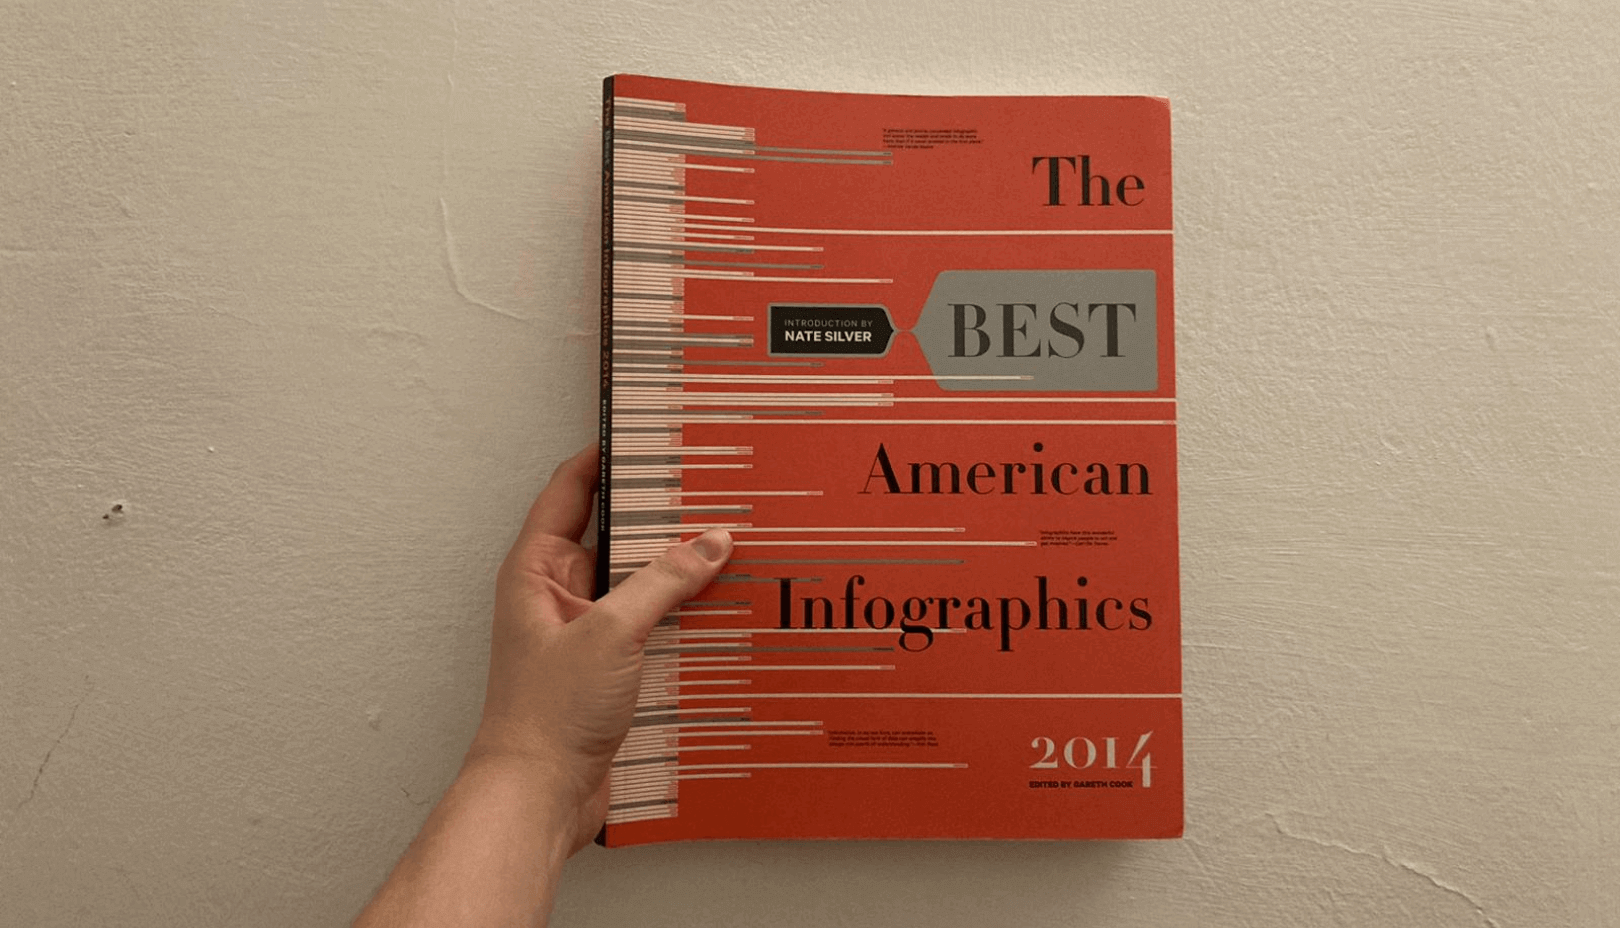 The Best American Infographics 2014 01 Takshahis.co.il